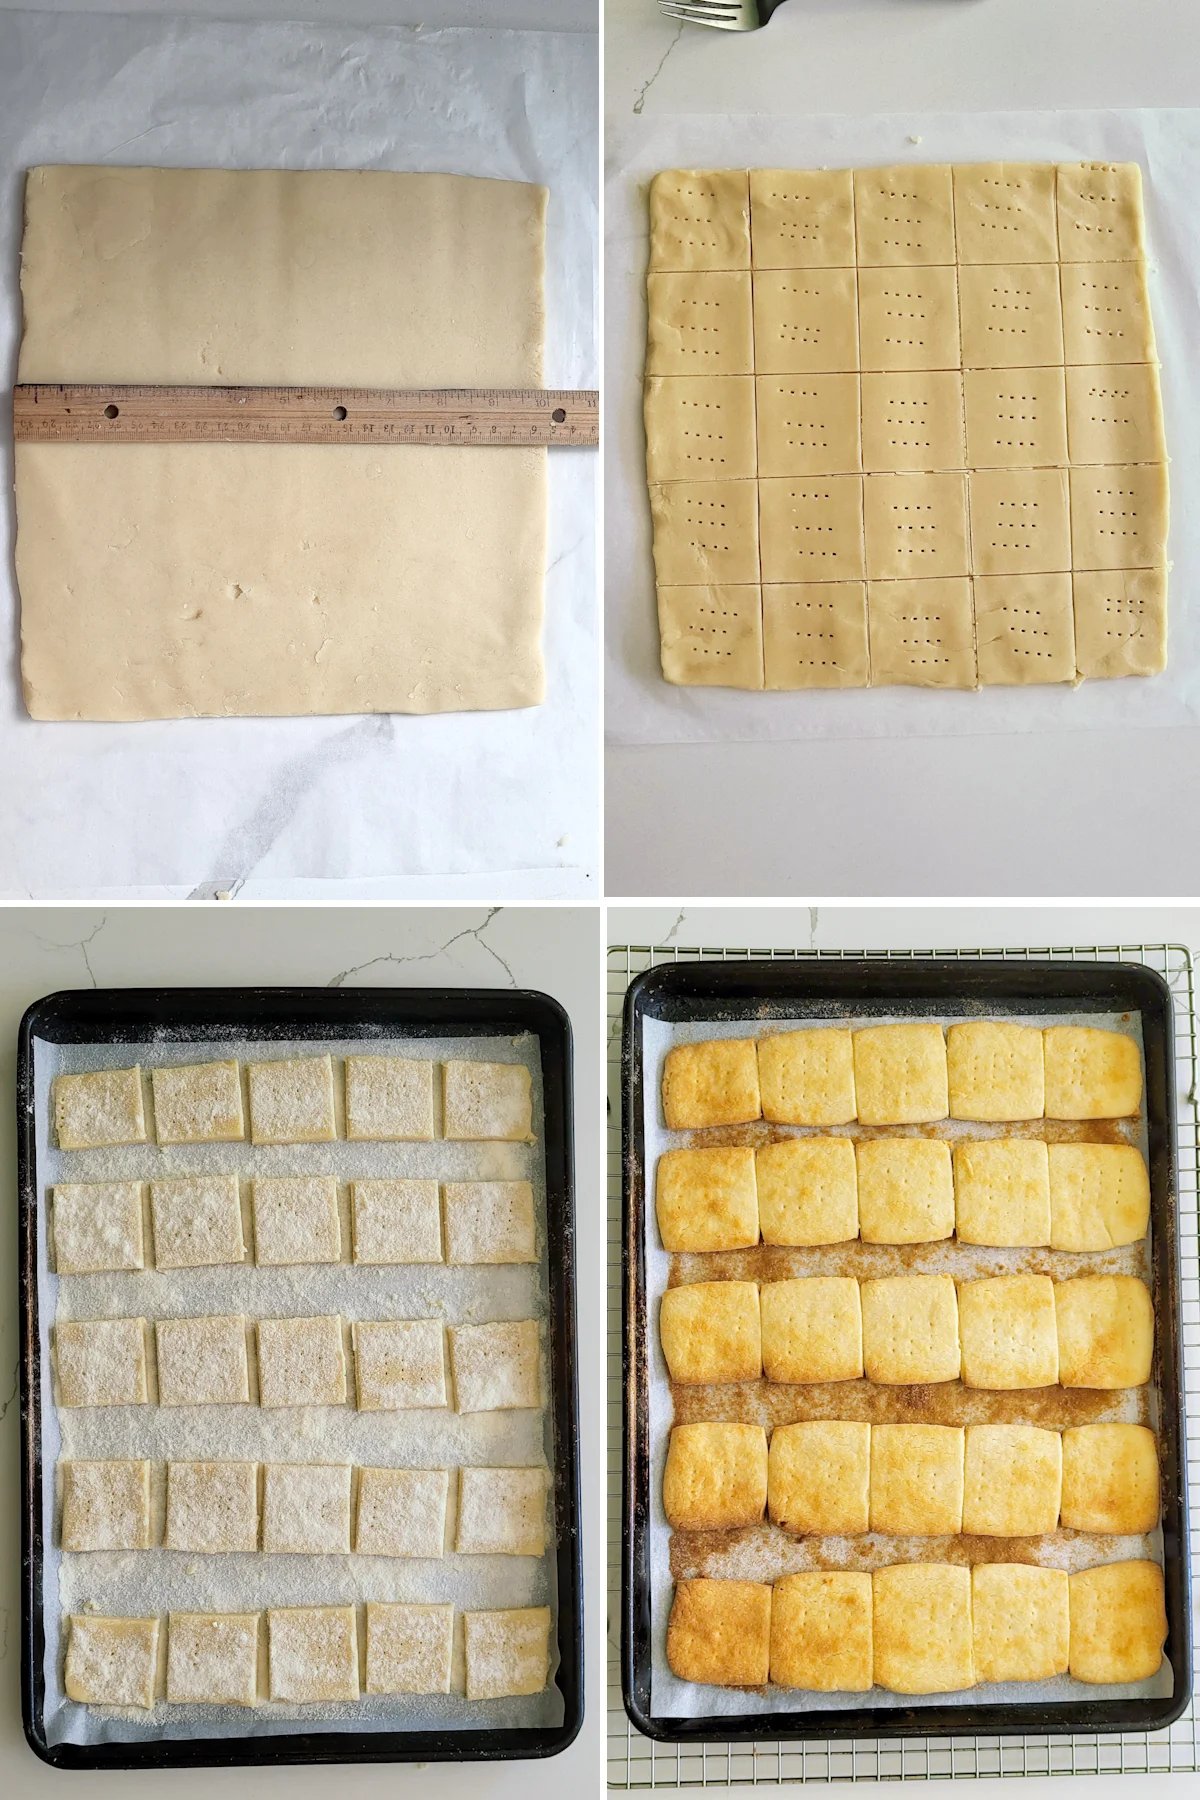 1. A 10" square of dough. 2. 25 square cut from a large square. 3. Unbaked shortbread cookies on a try. 4. Baked shortbread cookies on a tray.